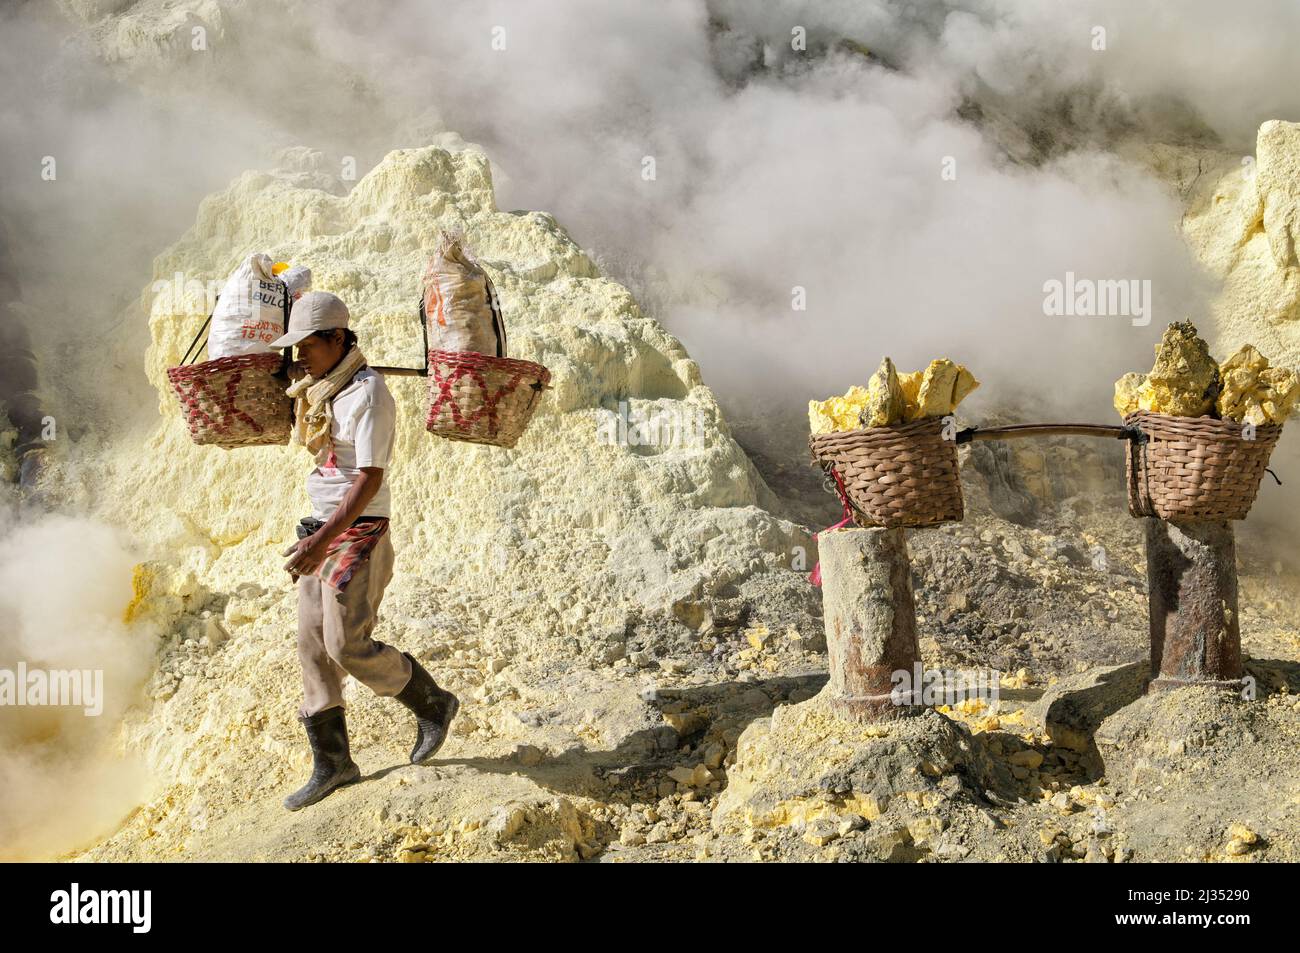 Sulfur miner carrying baskets inside the crater of Ijen volcano, Java Island, Indonesia Stock Photo